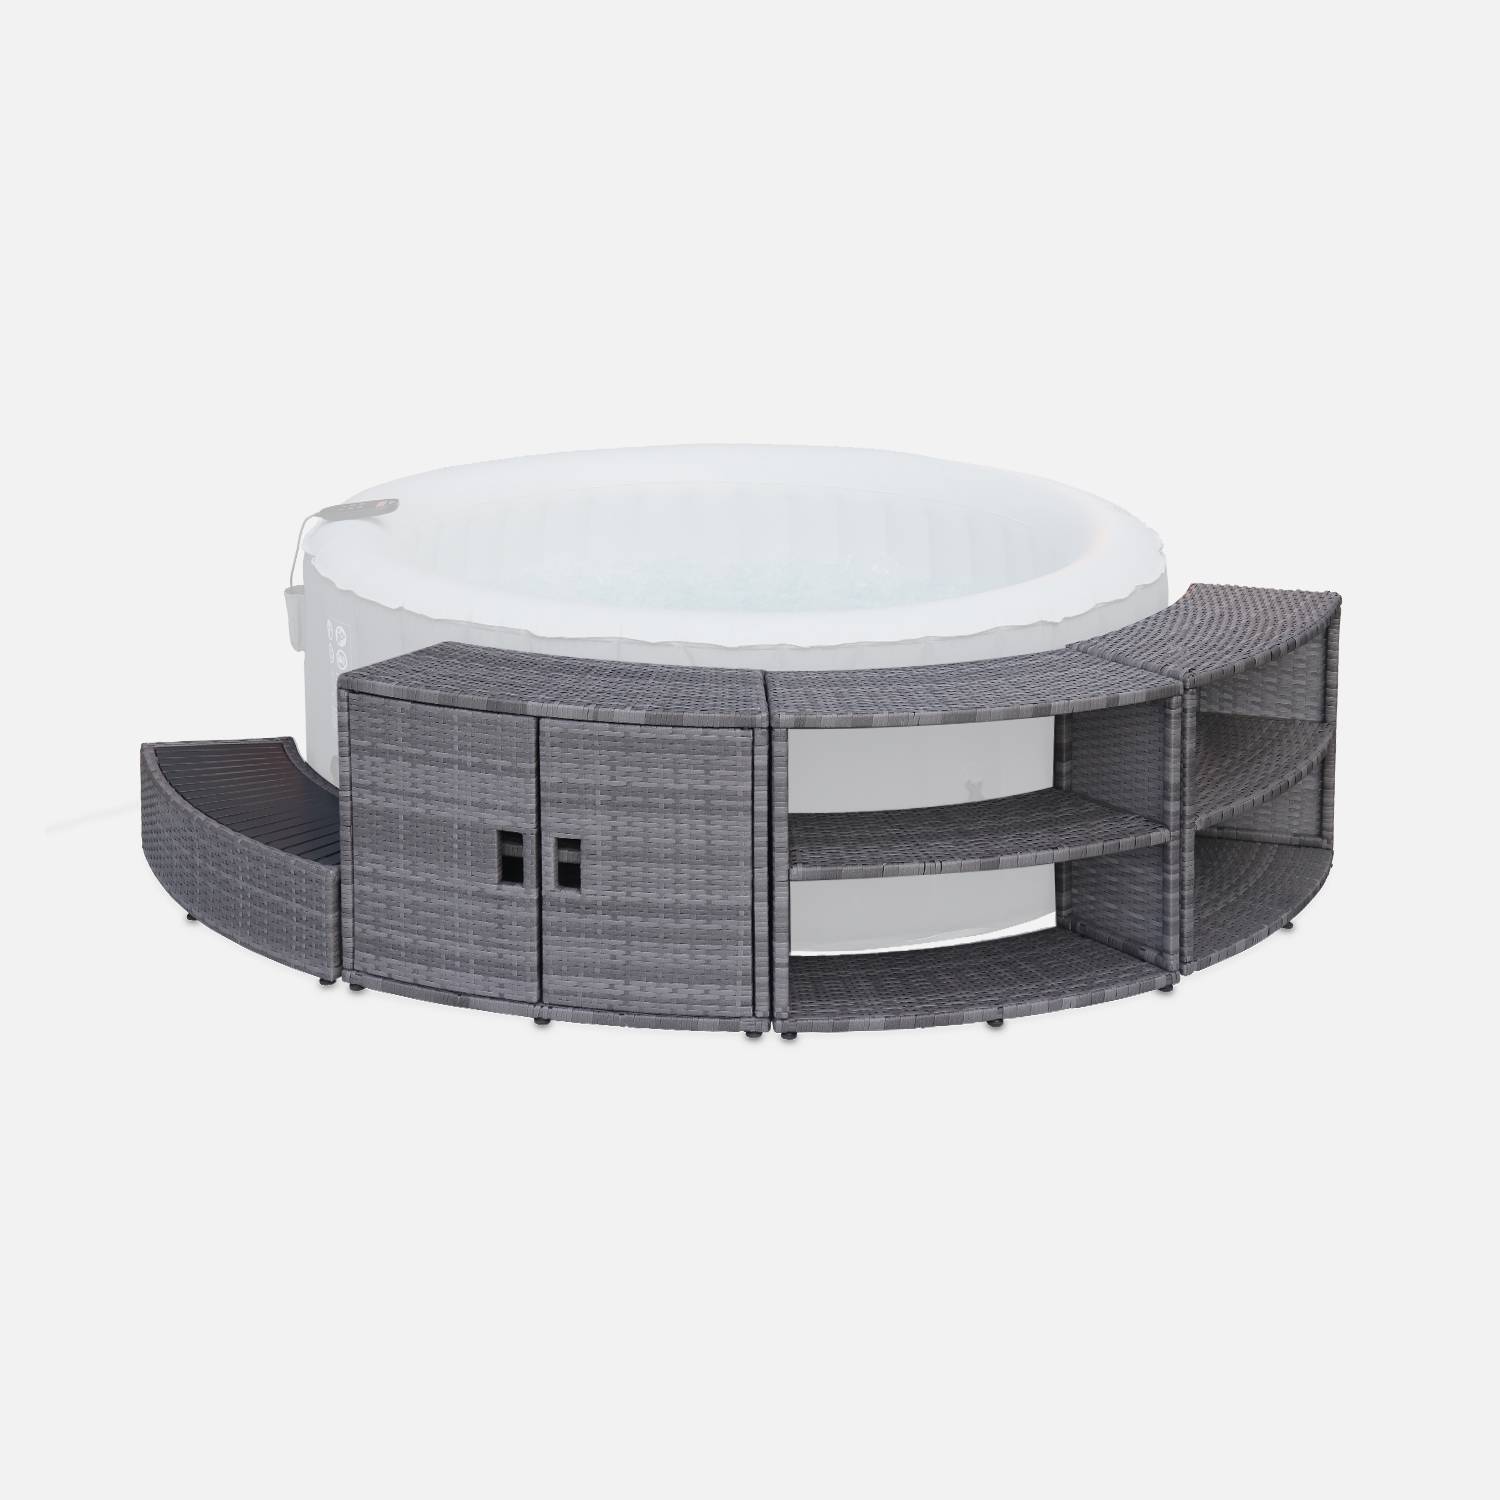 Grey polyrattan for hot tub surrond for 4 or 6 seater hot tub 180 x 70 cm - aluminium structure, shelves, cabinet and footstep,sweeek,Photo1